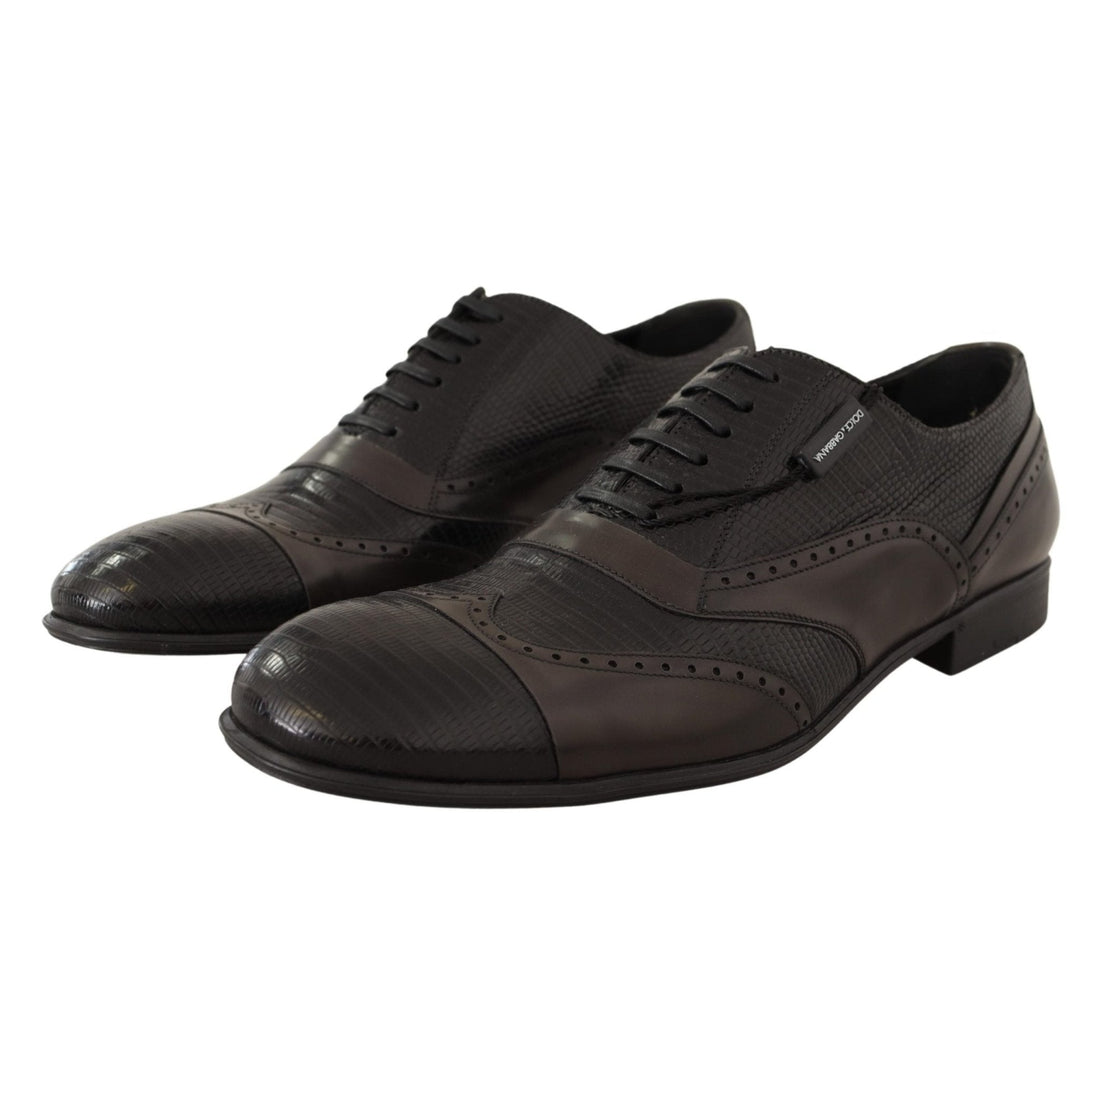 Dolce & Gabbana Brown Lizard Skin Leather Oxford Dress Shoes - Paris Deluxe